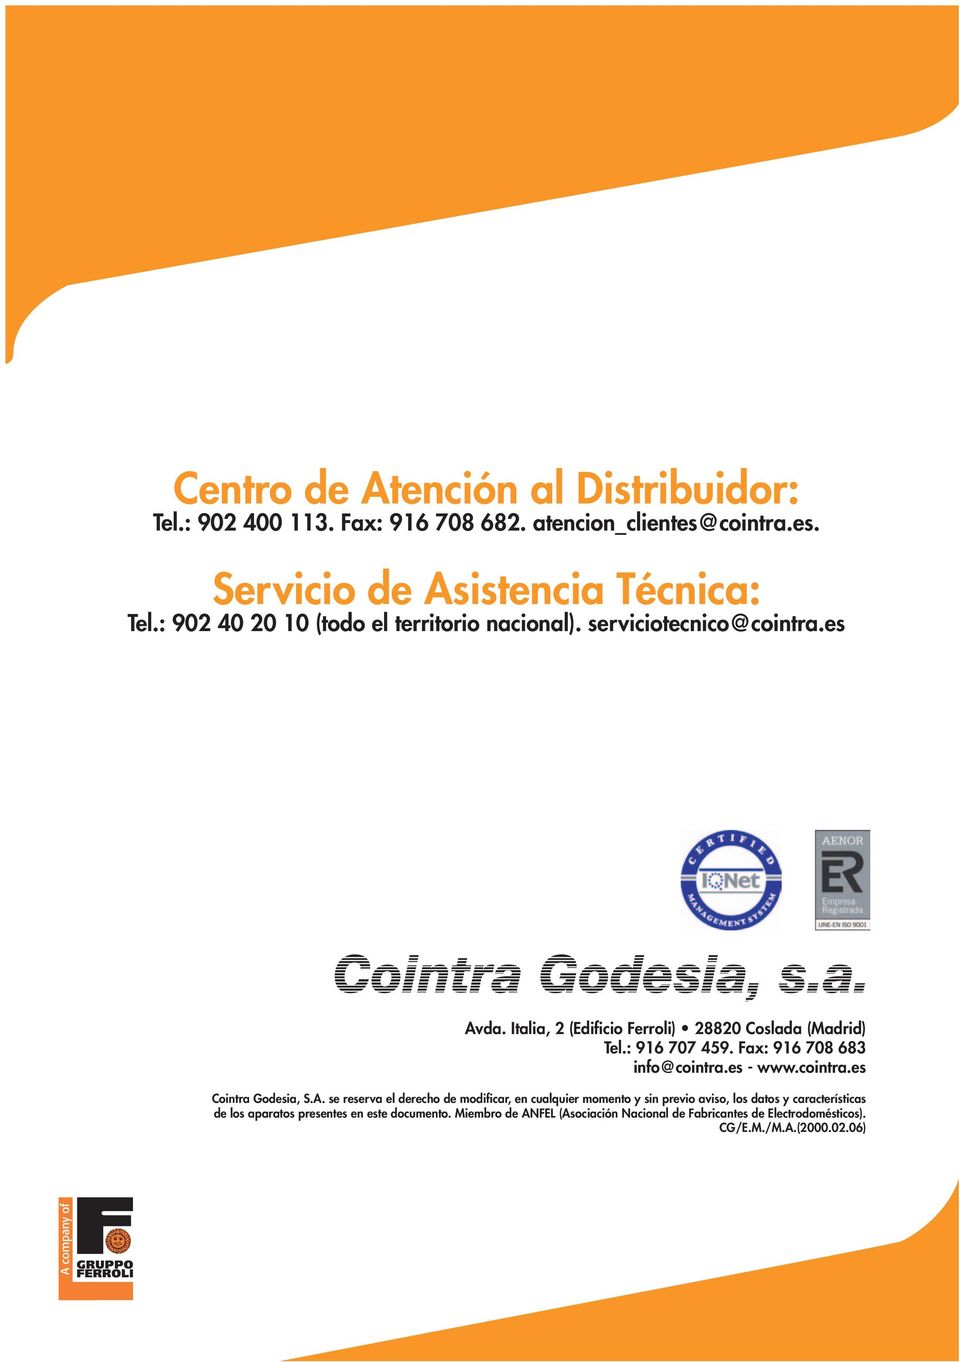 : 916 707 459. Fax: 916 708 683 info@cointra.es - www.cointra.es Cointra Godesia, S.A.